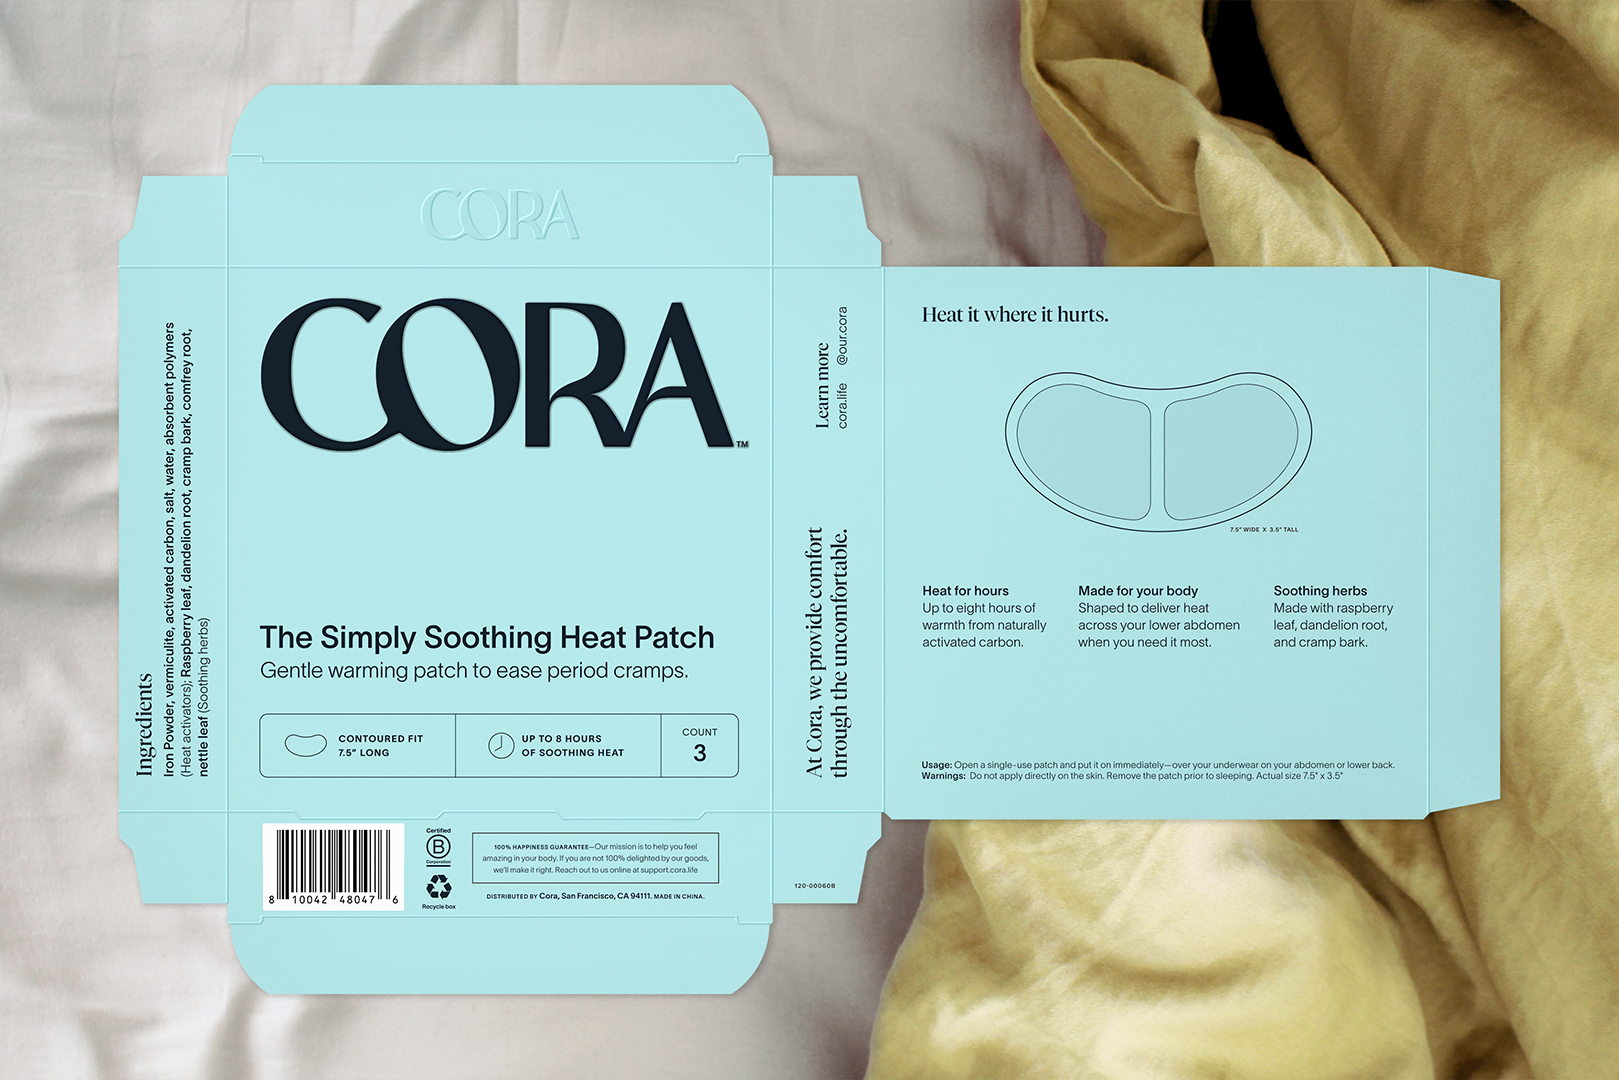 Wellness And Period Care Brand Cora Launches New Inclusive